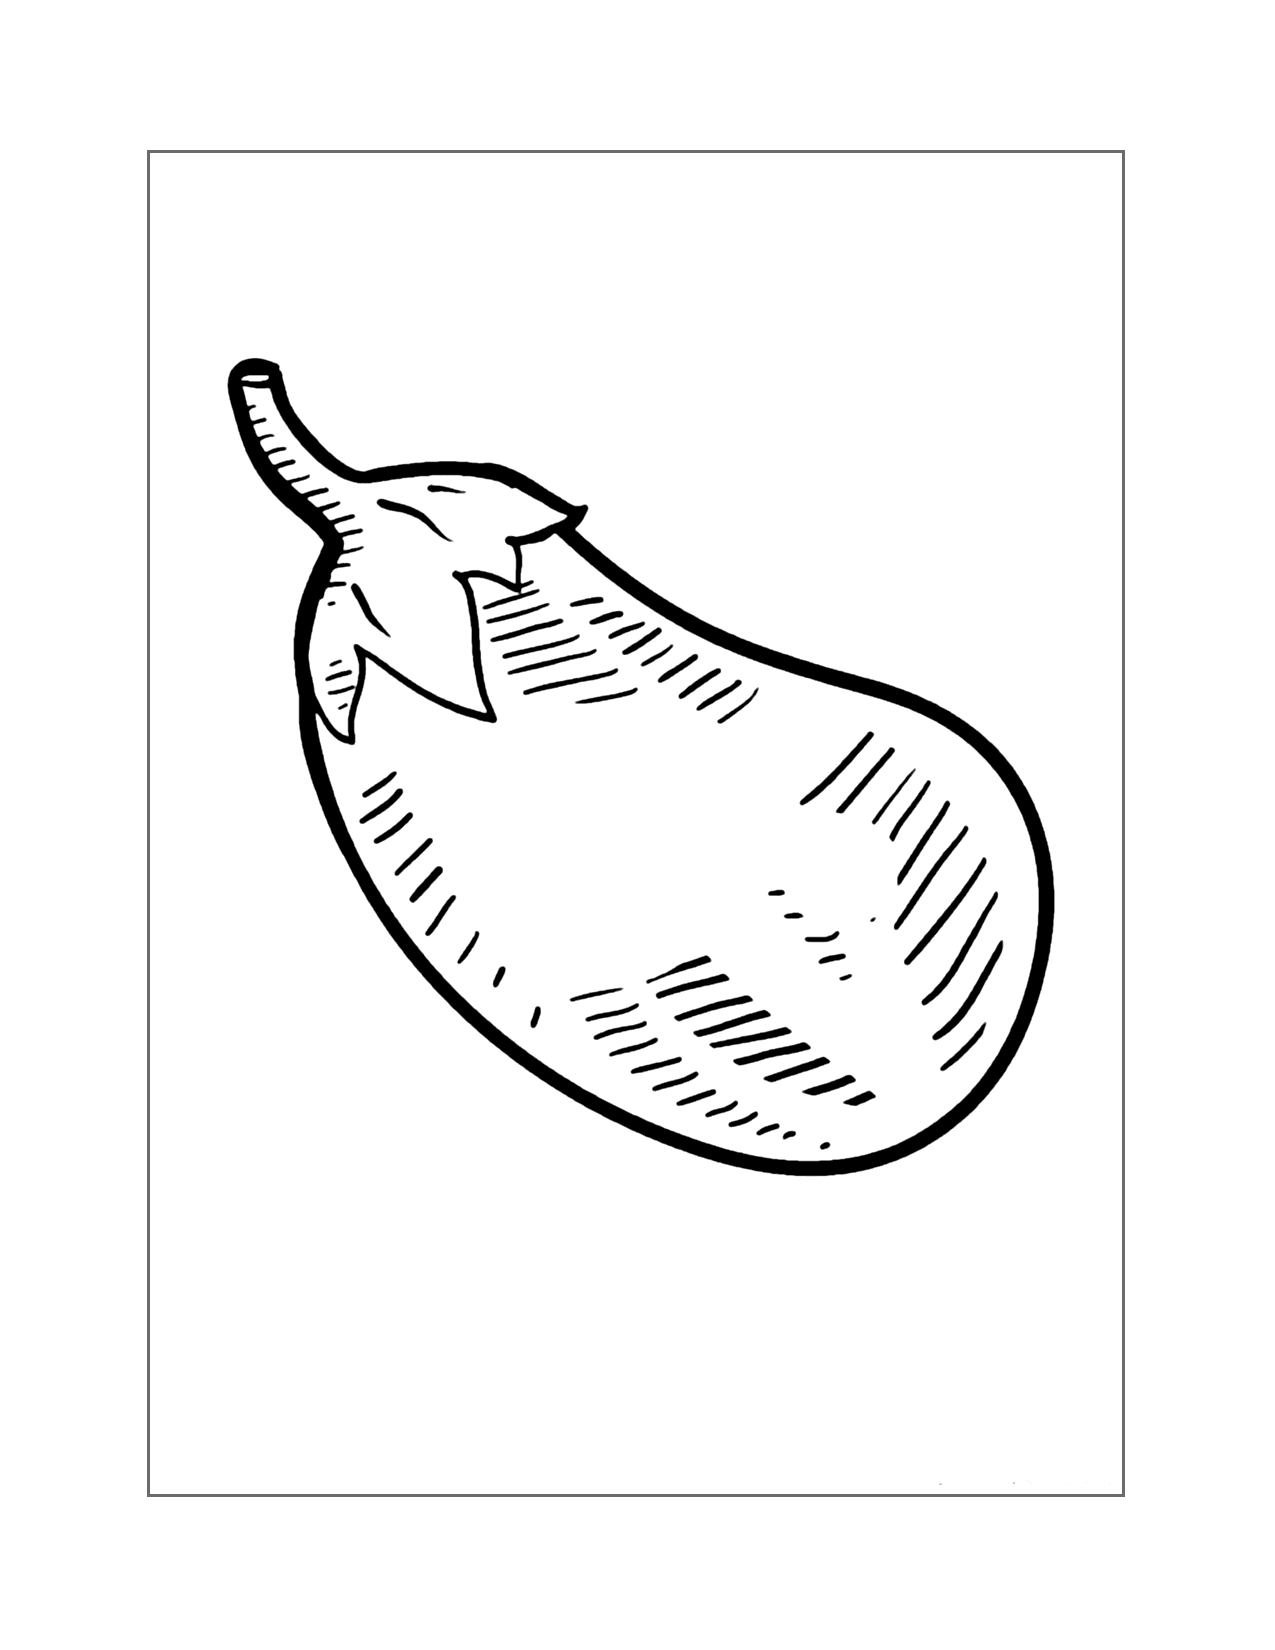 Eggplant With Texture Coloring Page